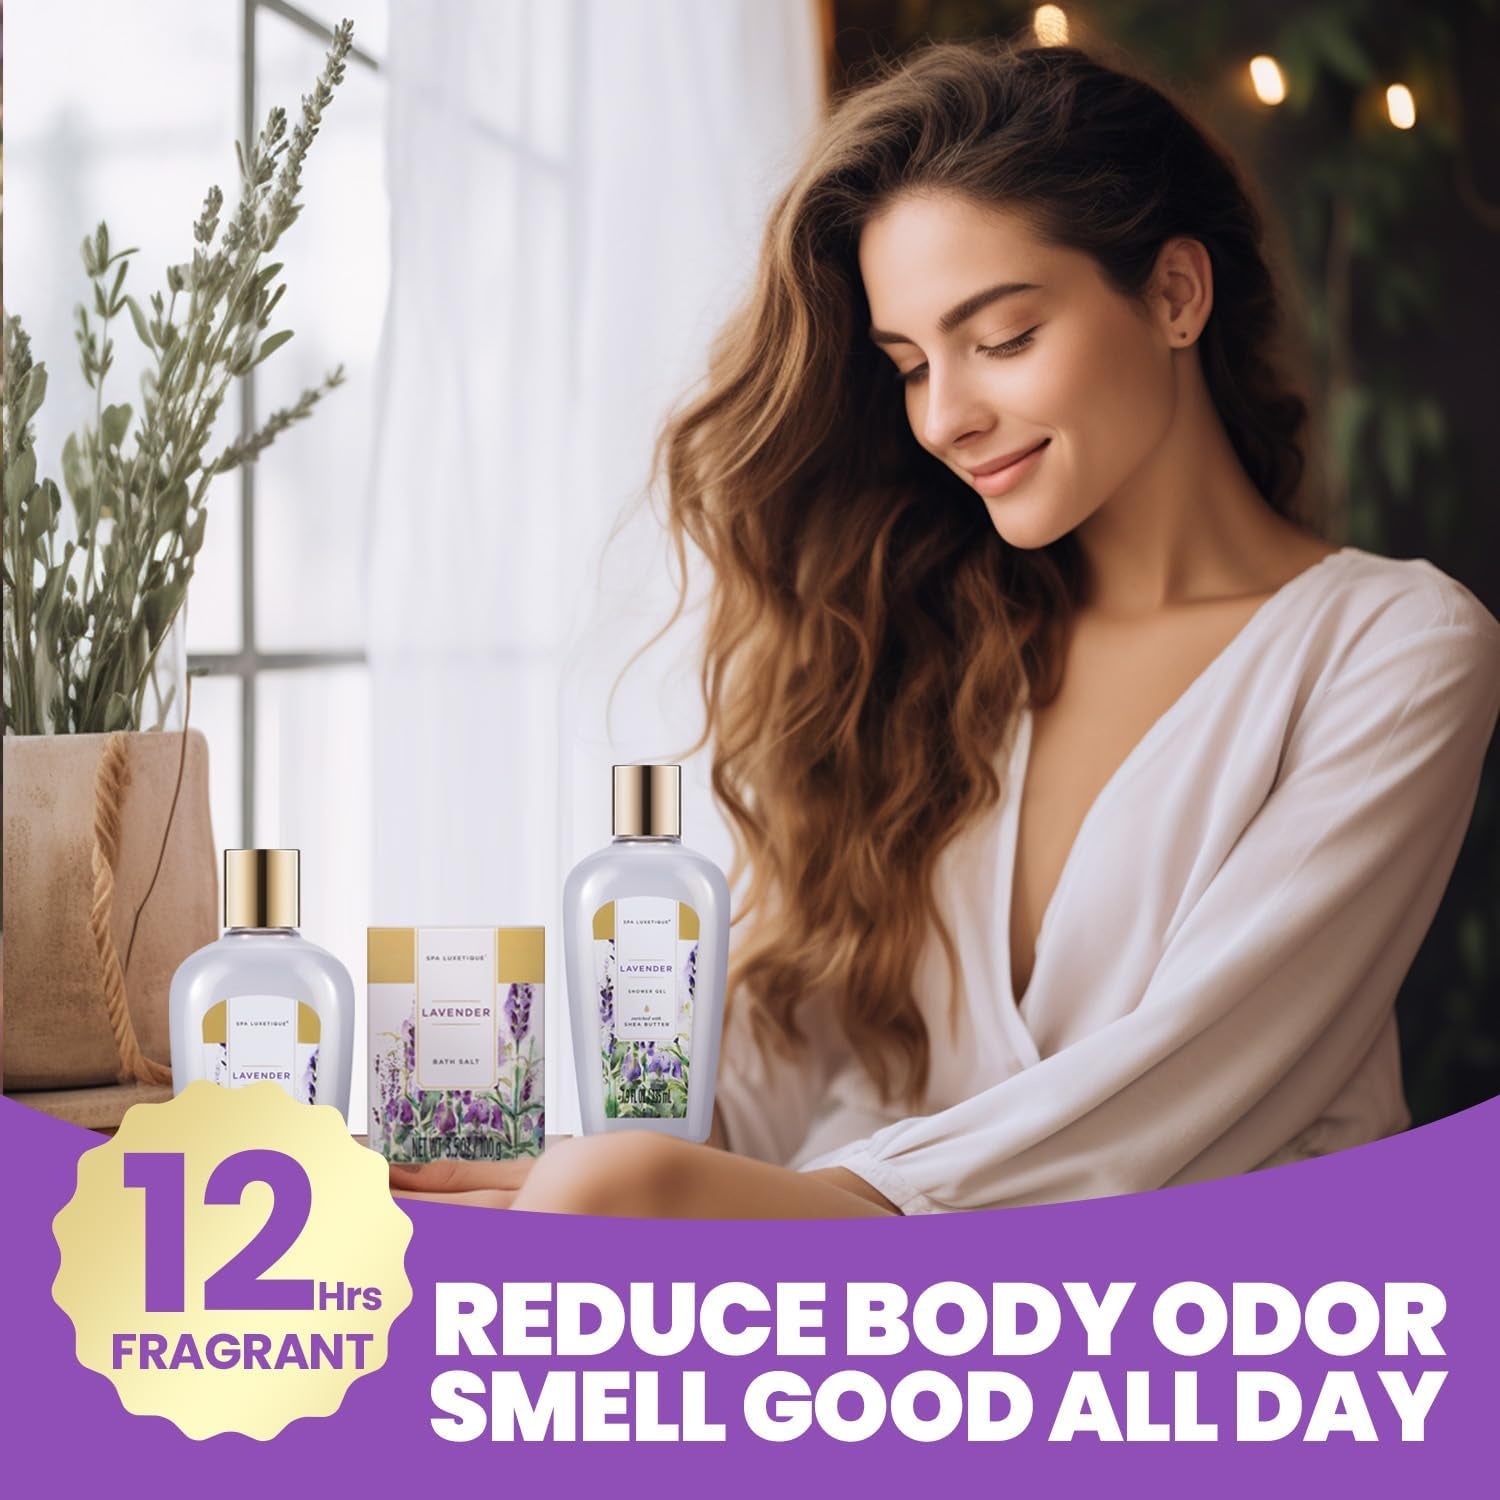 Pamper Gifts for Women, 8Pcs Lavender Bath Set for Women Gifts, Spa Gifts Set with Bubble Bath, Body Lotion, Relaxing Gifts for Women, Birthday Gifts Mother'S Day Christmas Gifts